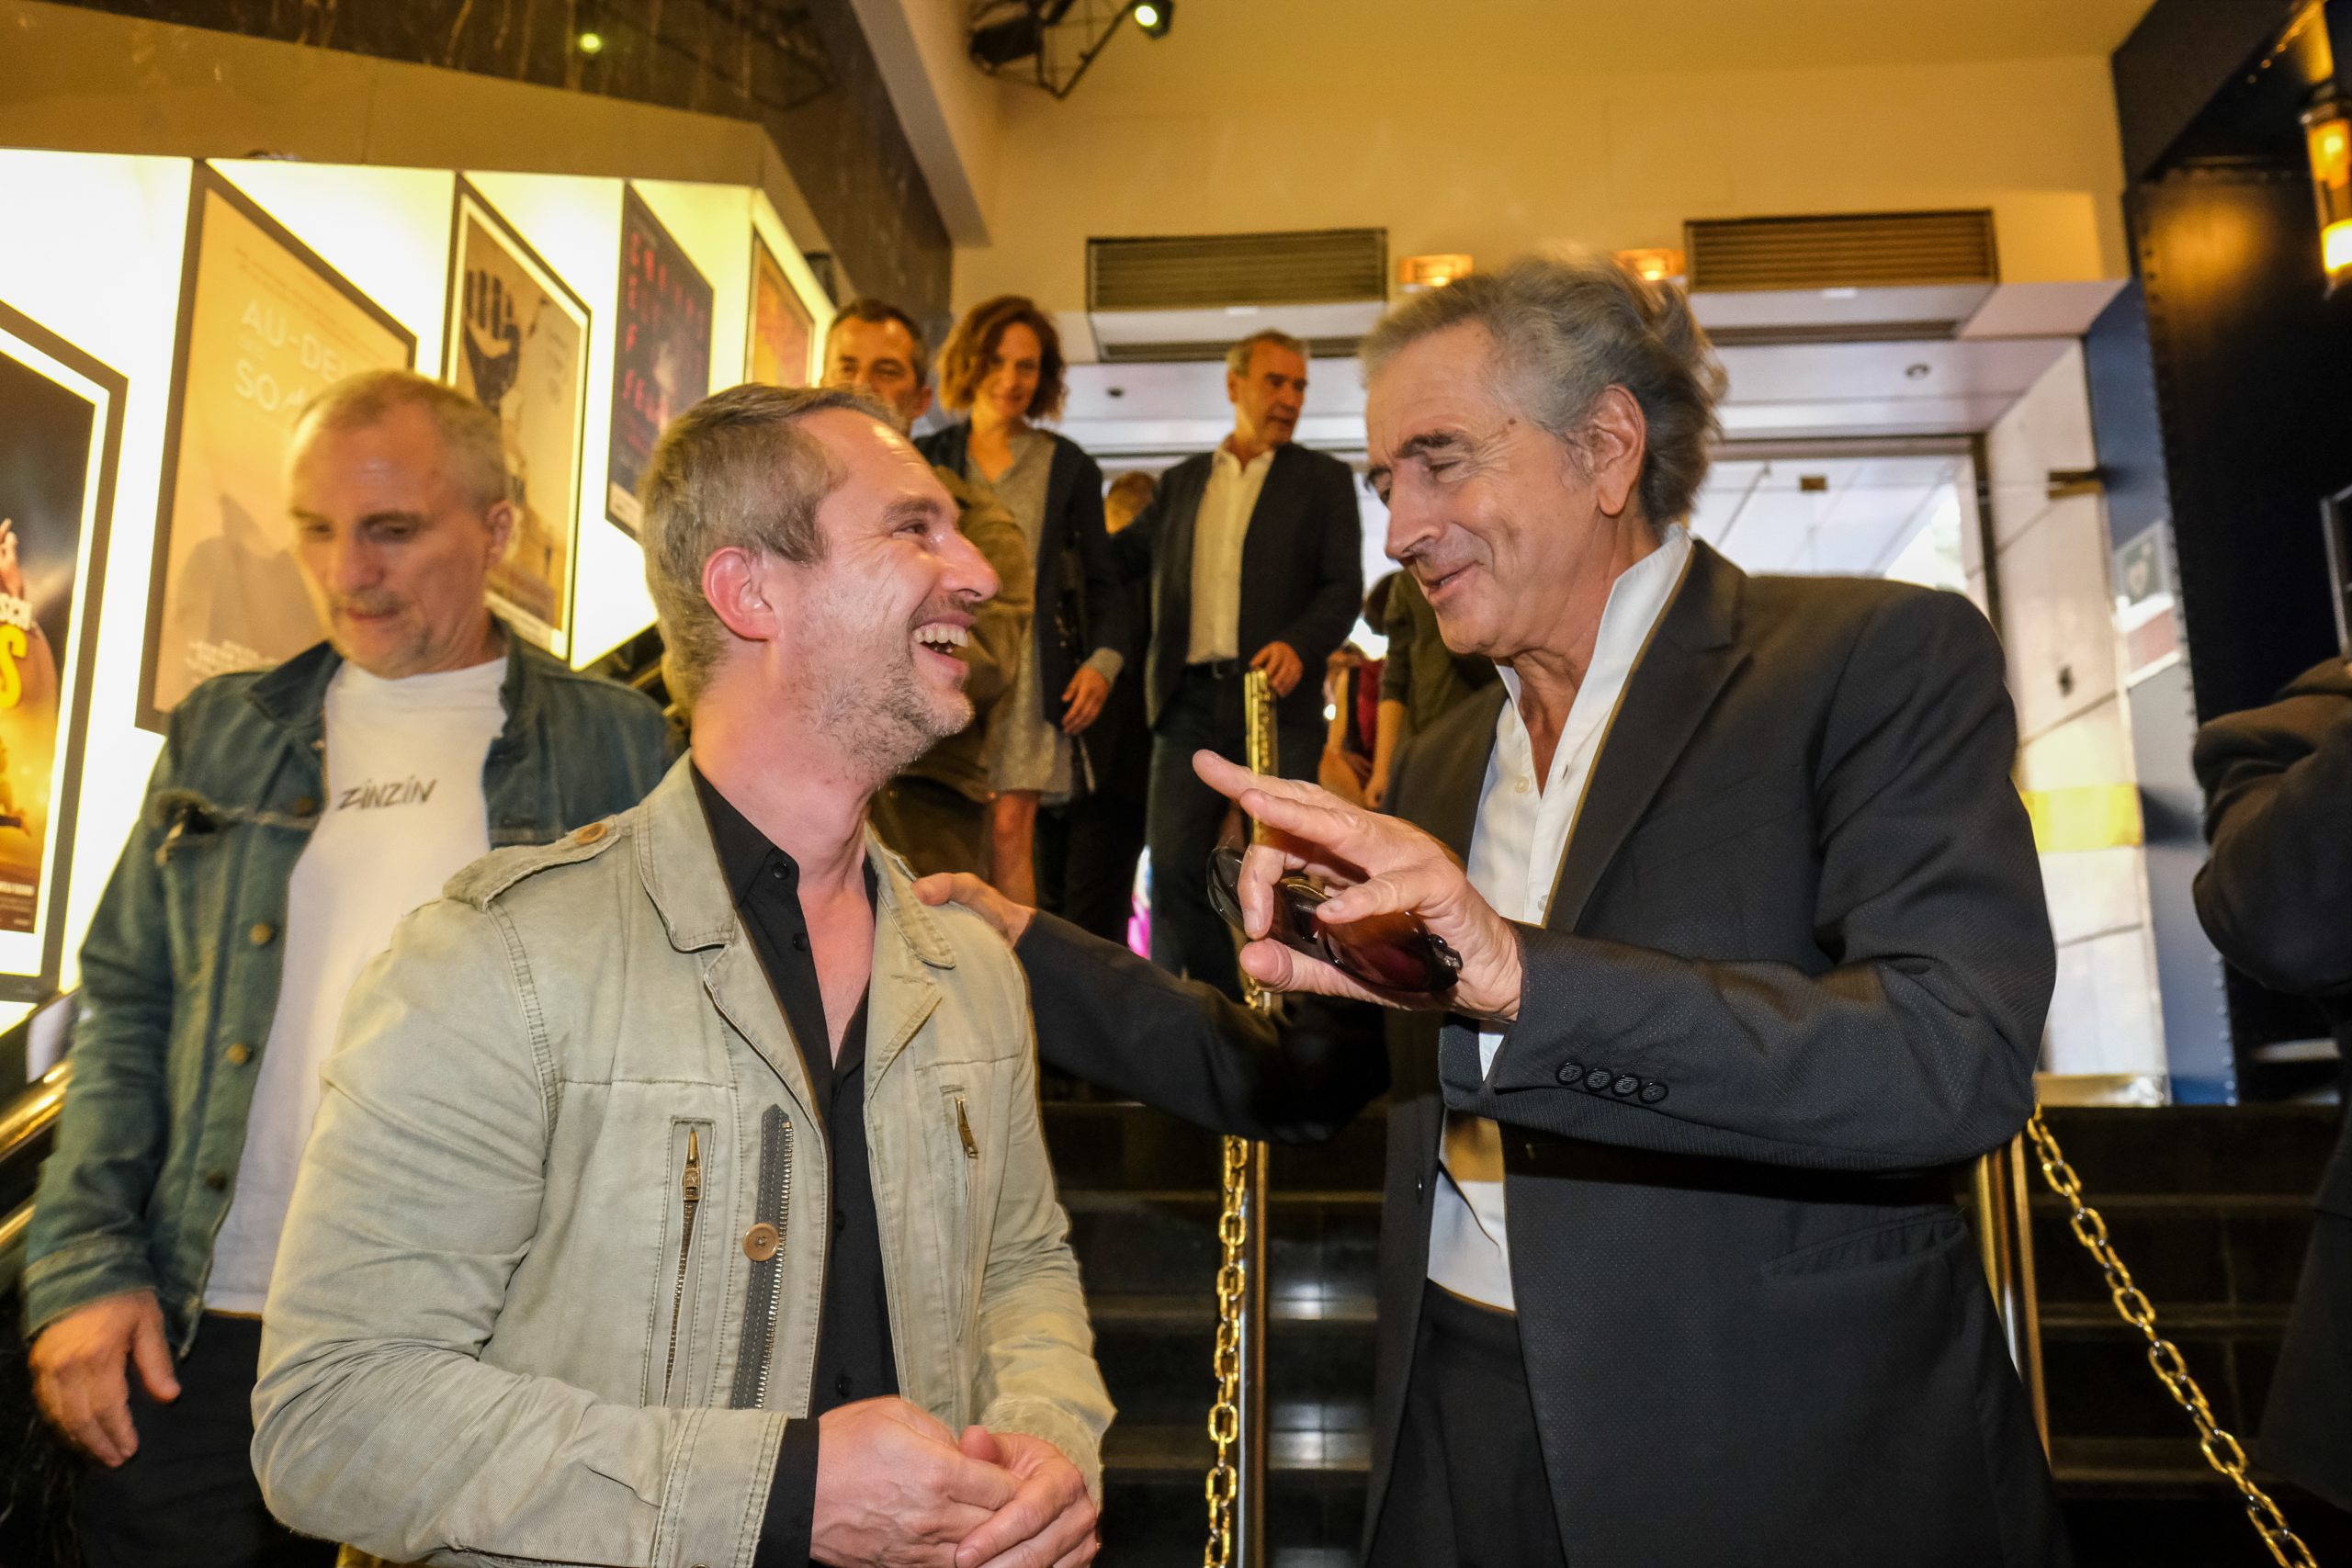 Bernard-Henri Lévy and David Martinon, French ambassador to Afghanistan, at the preview of BHL's film "Why Ukraine", at the Cinéma Le Balzac in Paris.